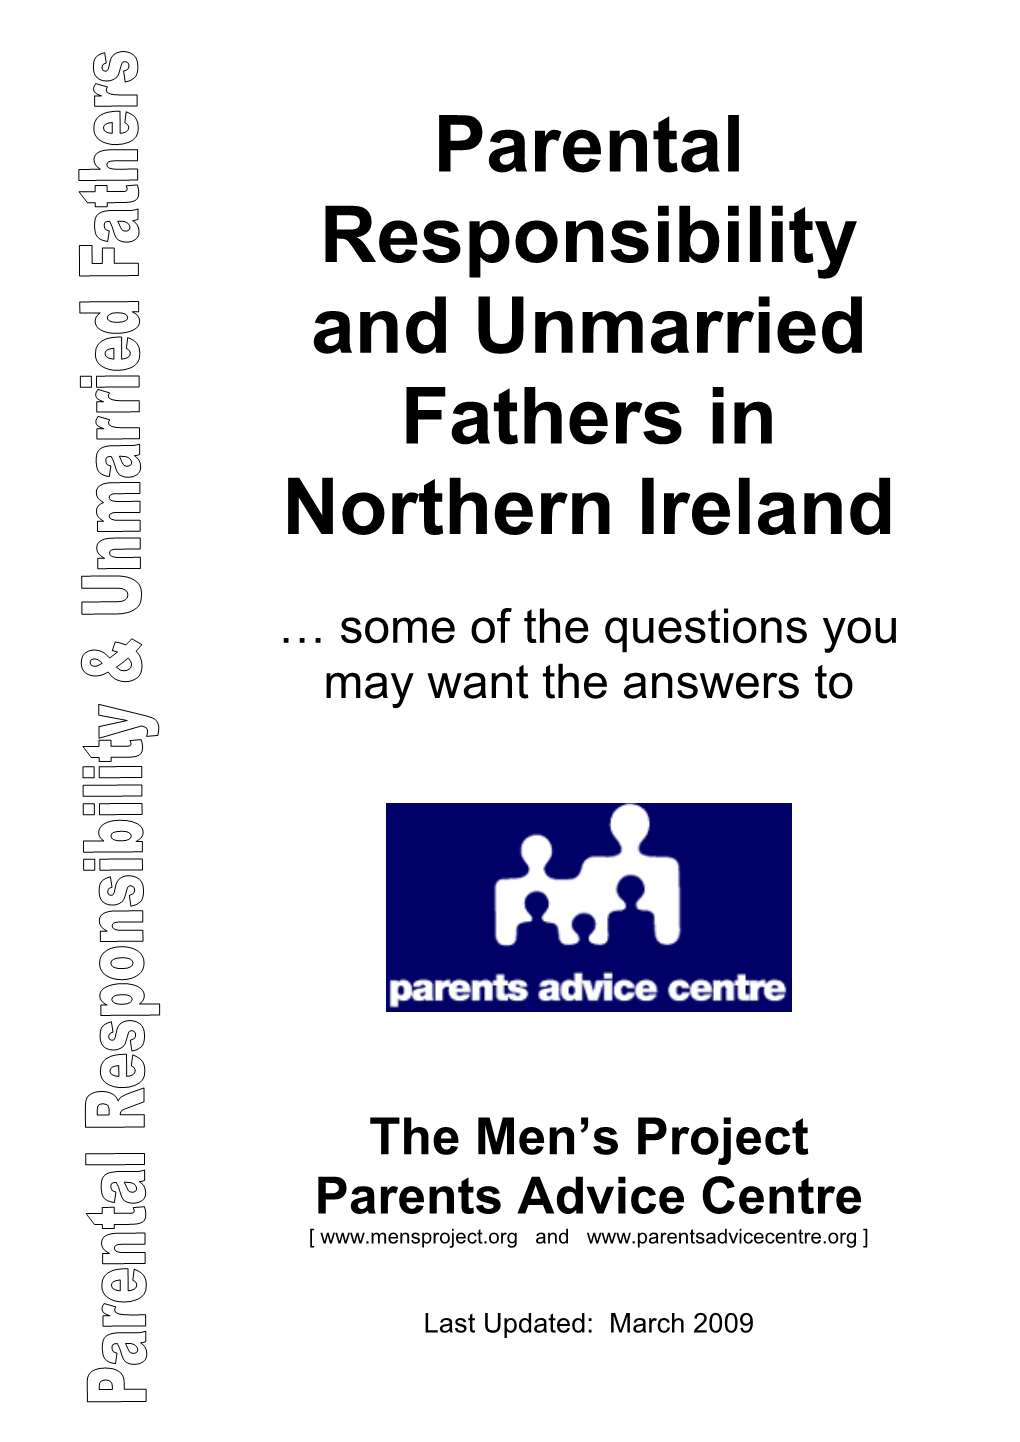 Parental Responsibility and Unmarried Fathers in Northern Ireland